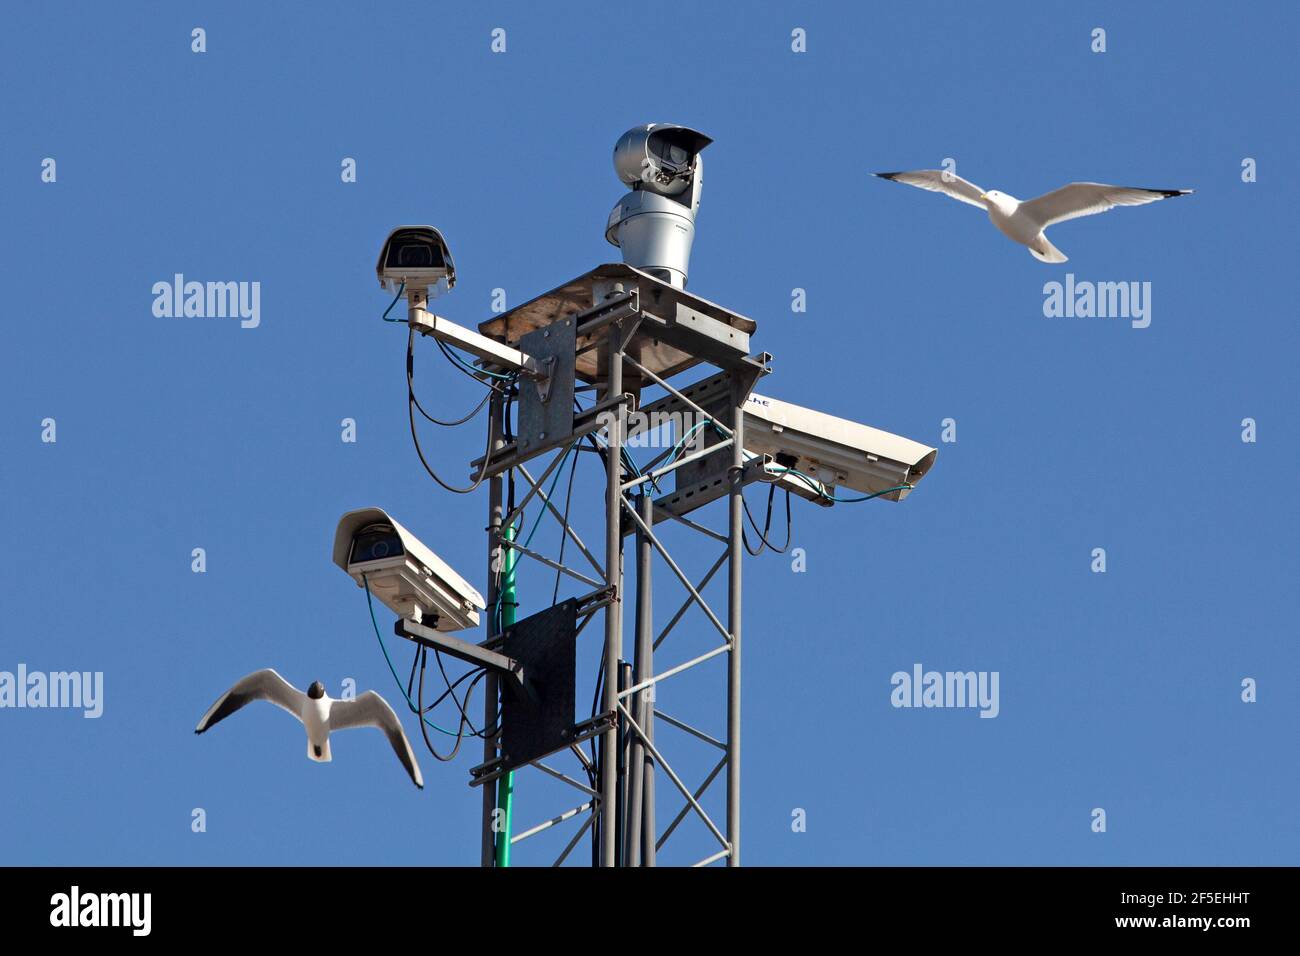 Stockholm, Sweden - March 25, 2021: Surveillance system with four cameras mounted high up with sea gulls flying around it. Illustrating the surveillan Stock Photo